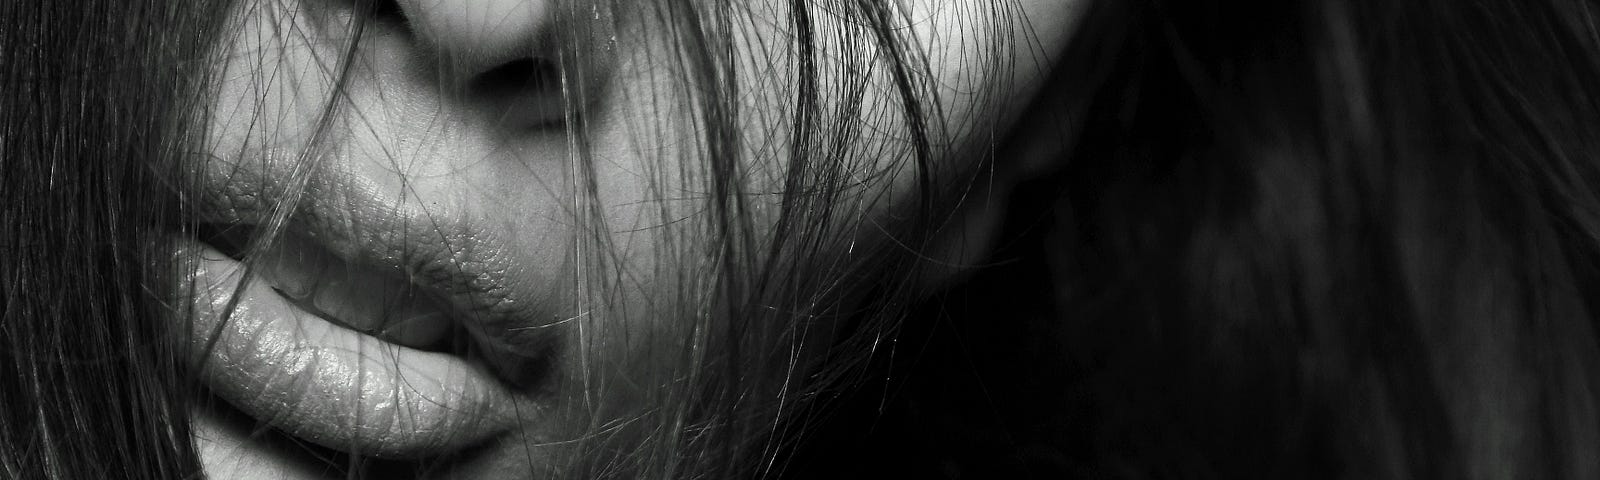 Black and white photography of a woman’s face covered slightly by her hair